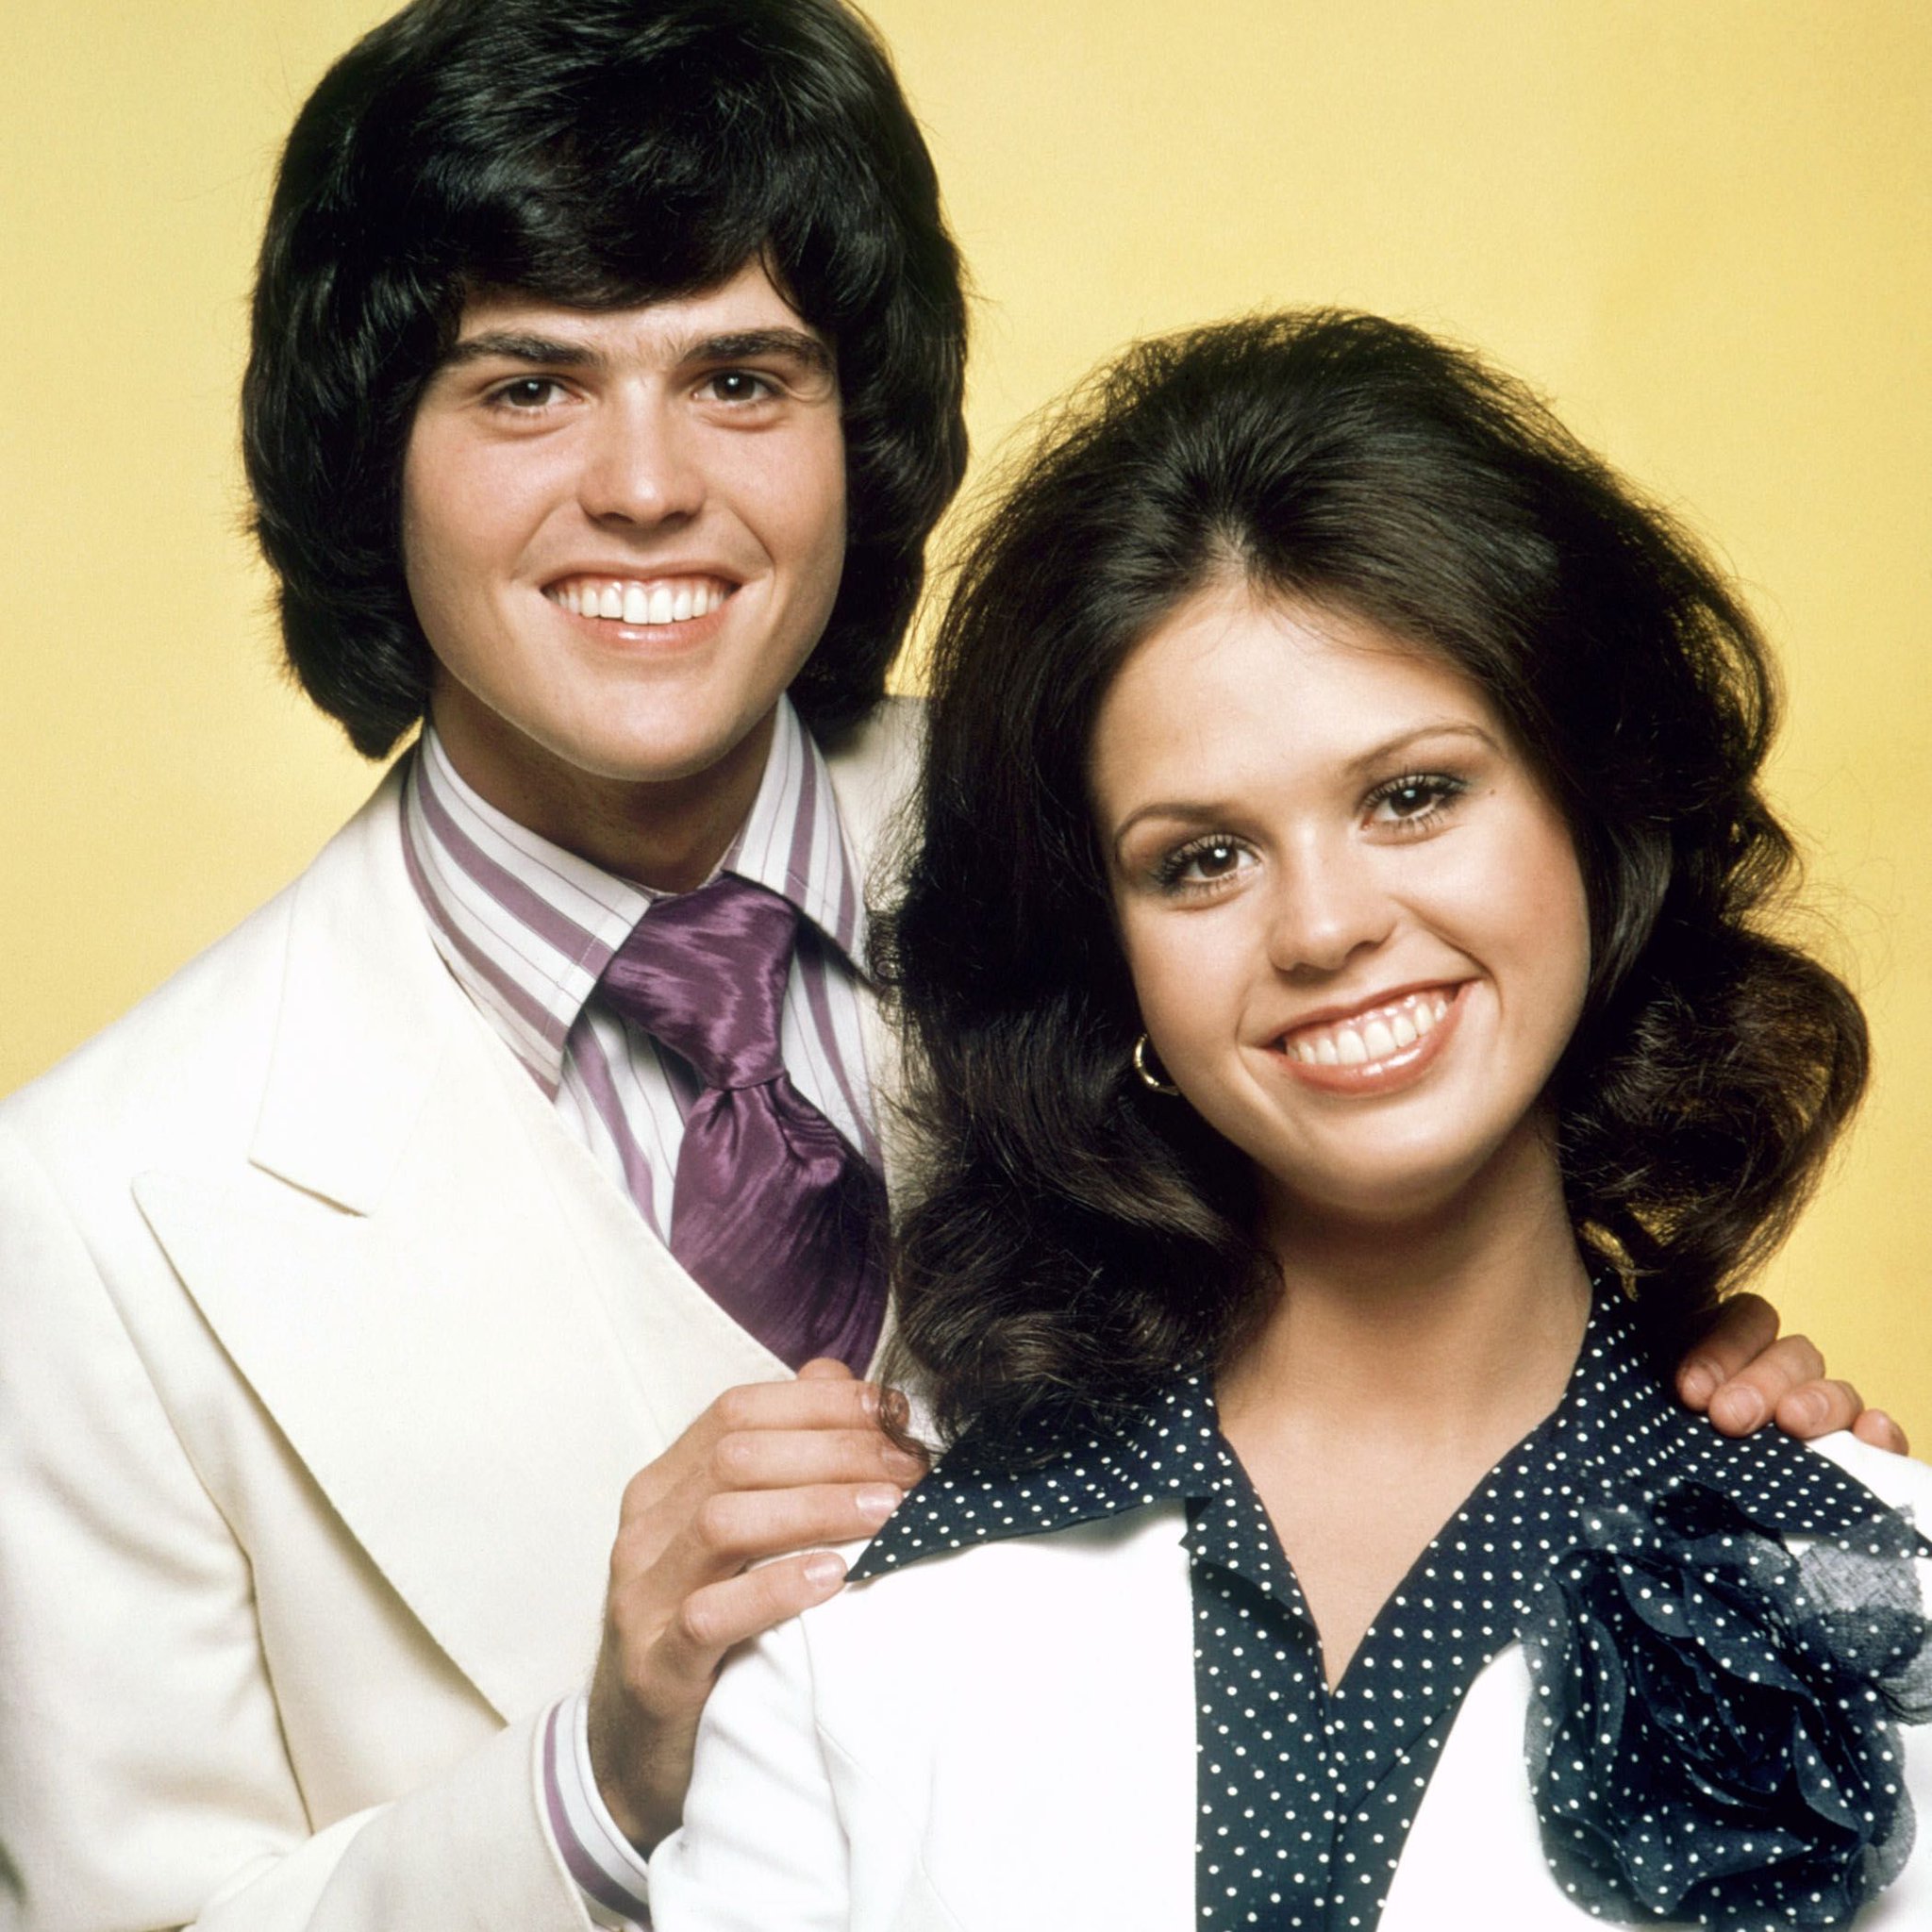 “DONNY AND MARIE w/ @DonnyOsmond and @MarieOsmond ended its run 40 years ag...